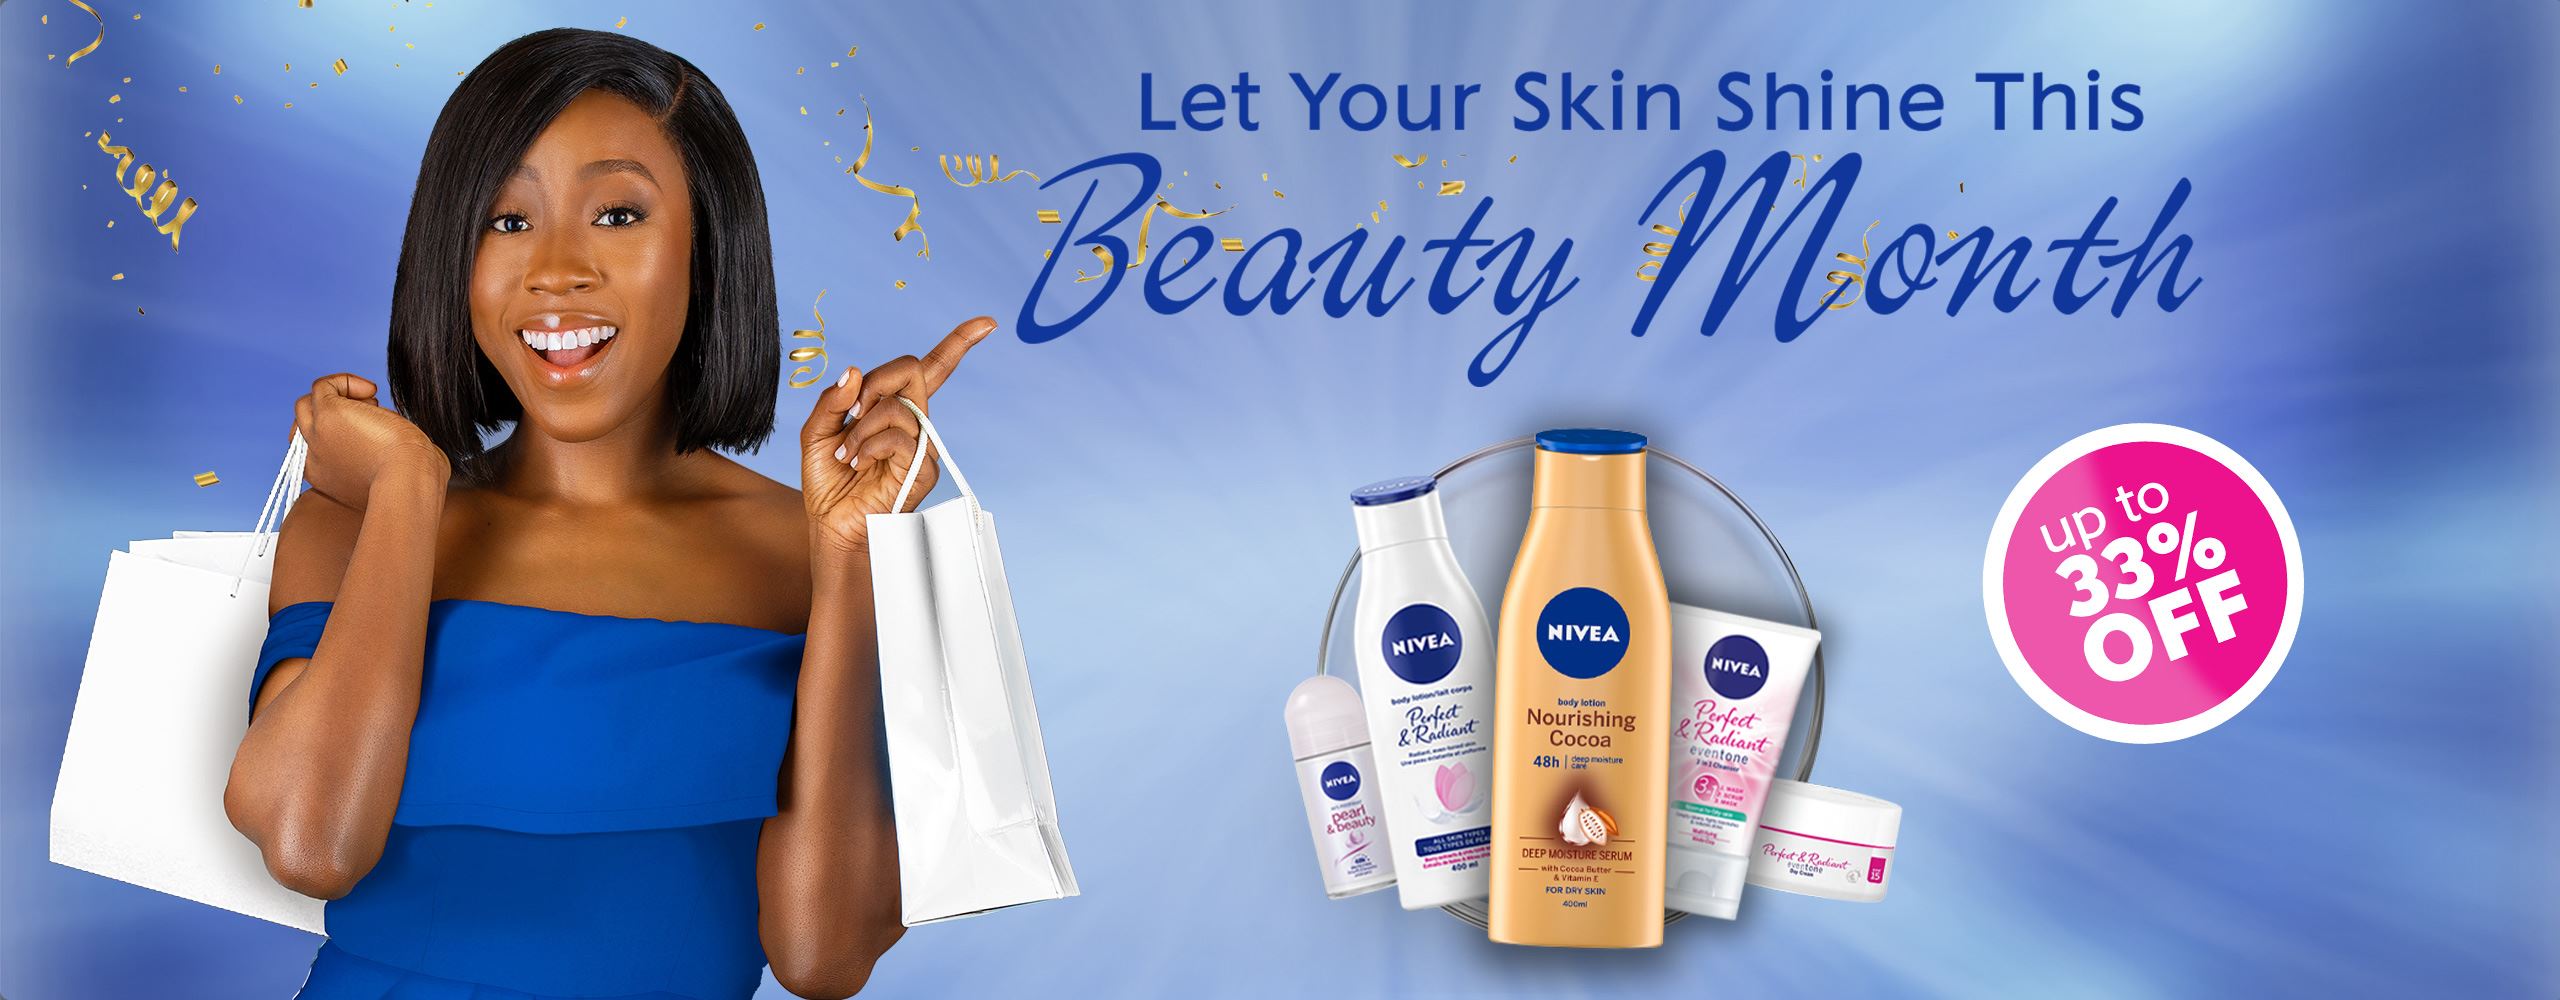 33% off! Beauty Month - #MyPowerWithNIVEA